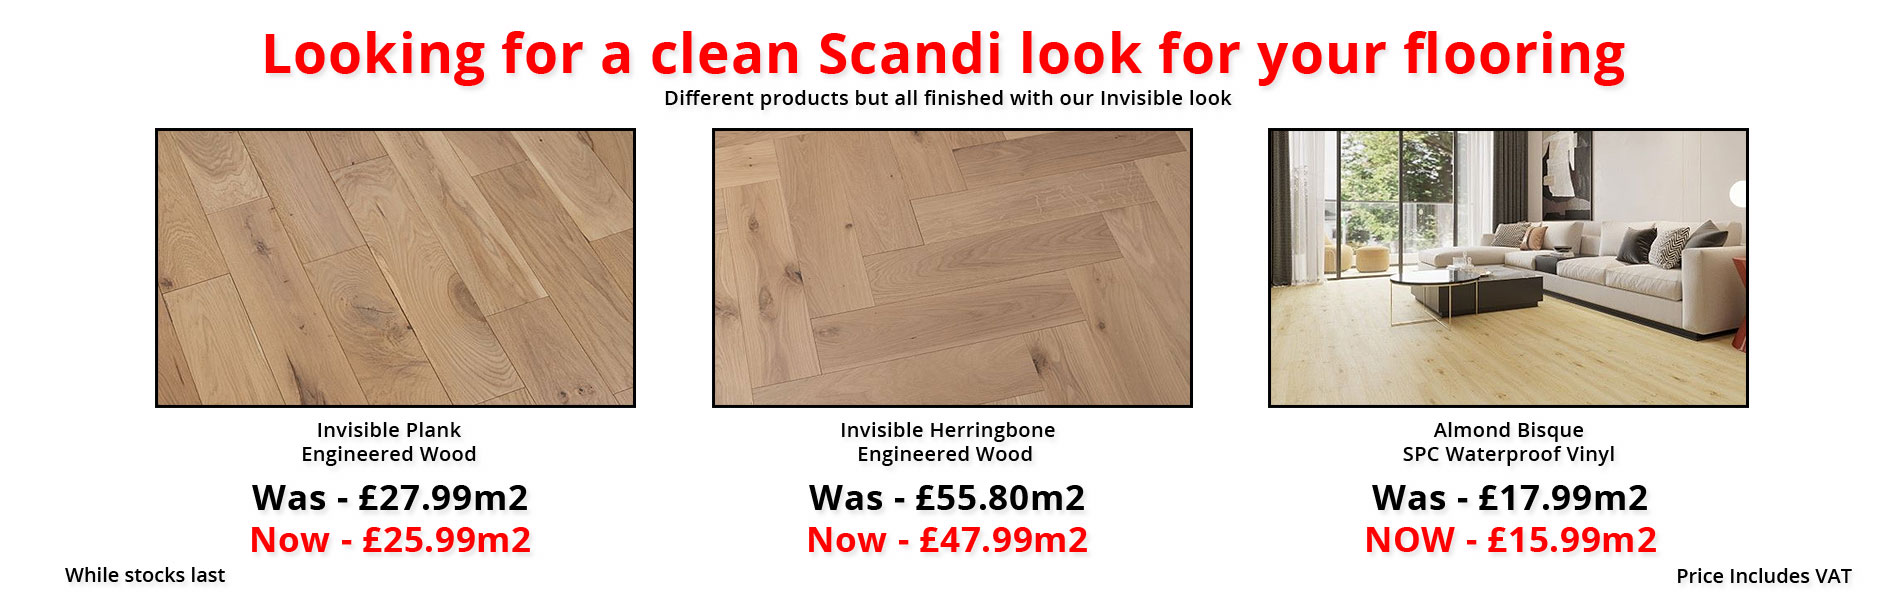 Looking for a clean Scandi look for your flooring